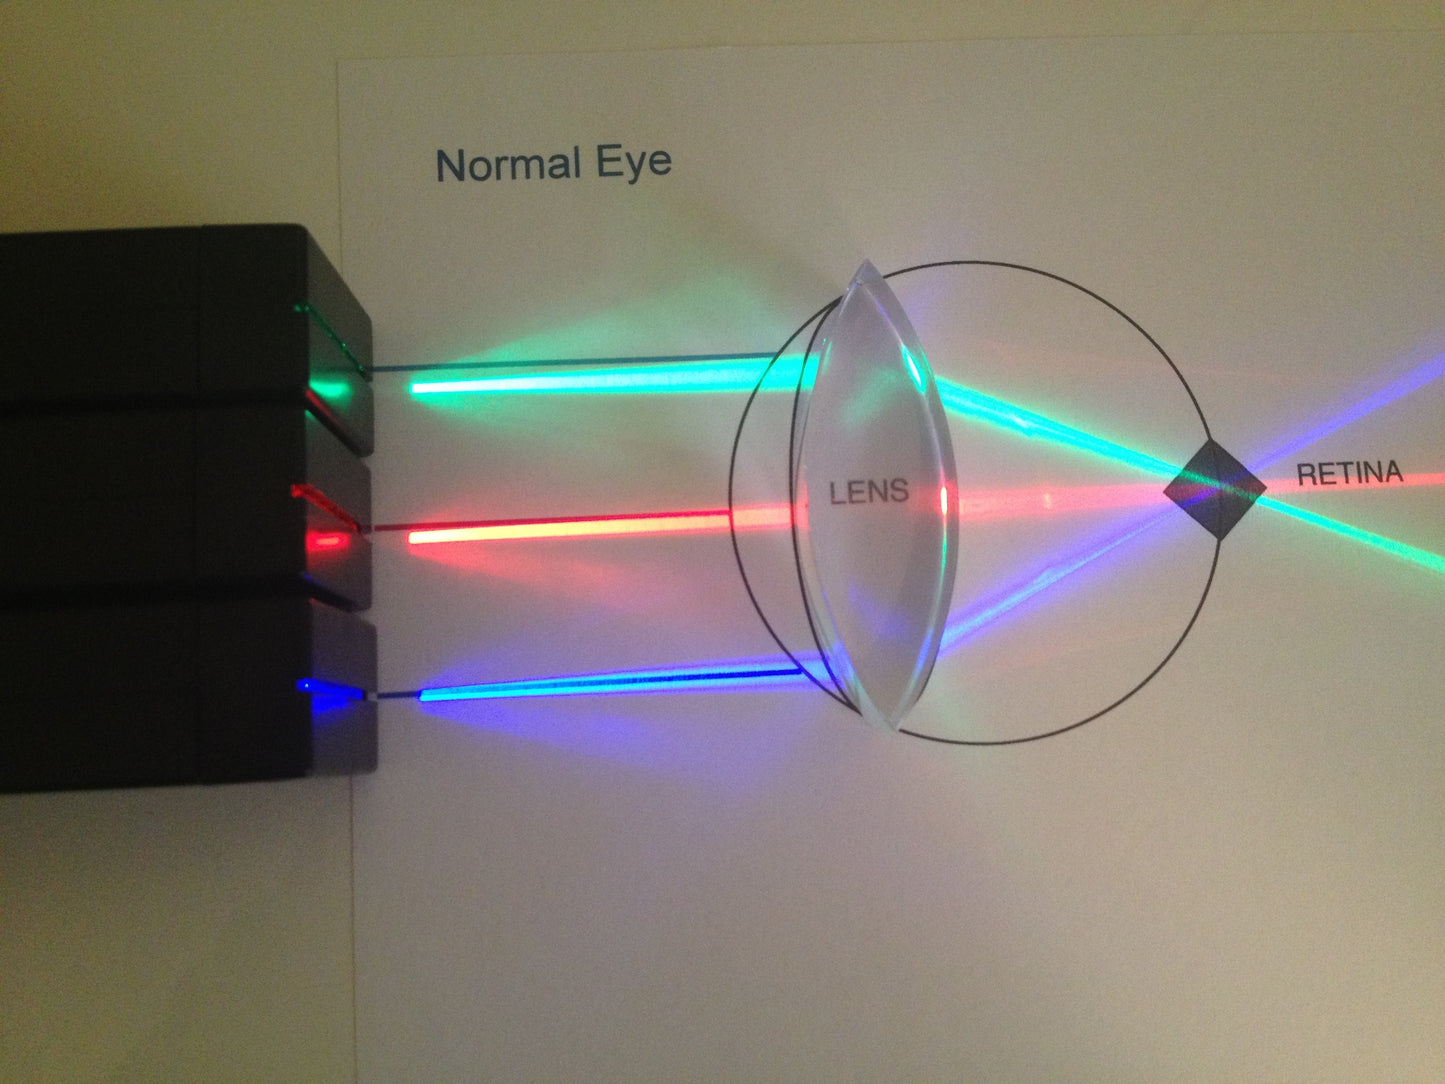 light-blox-LED-primary-colors-mixing-reflection-index-of-refraction-classroom-learning-teaching-kit